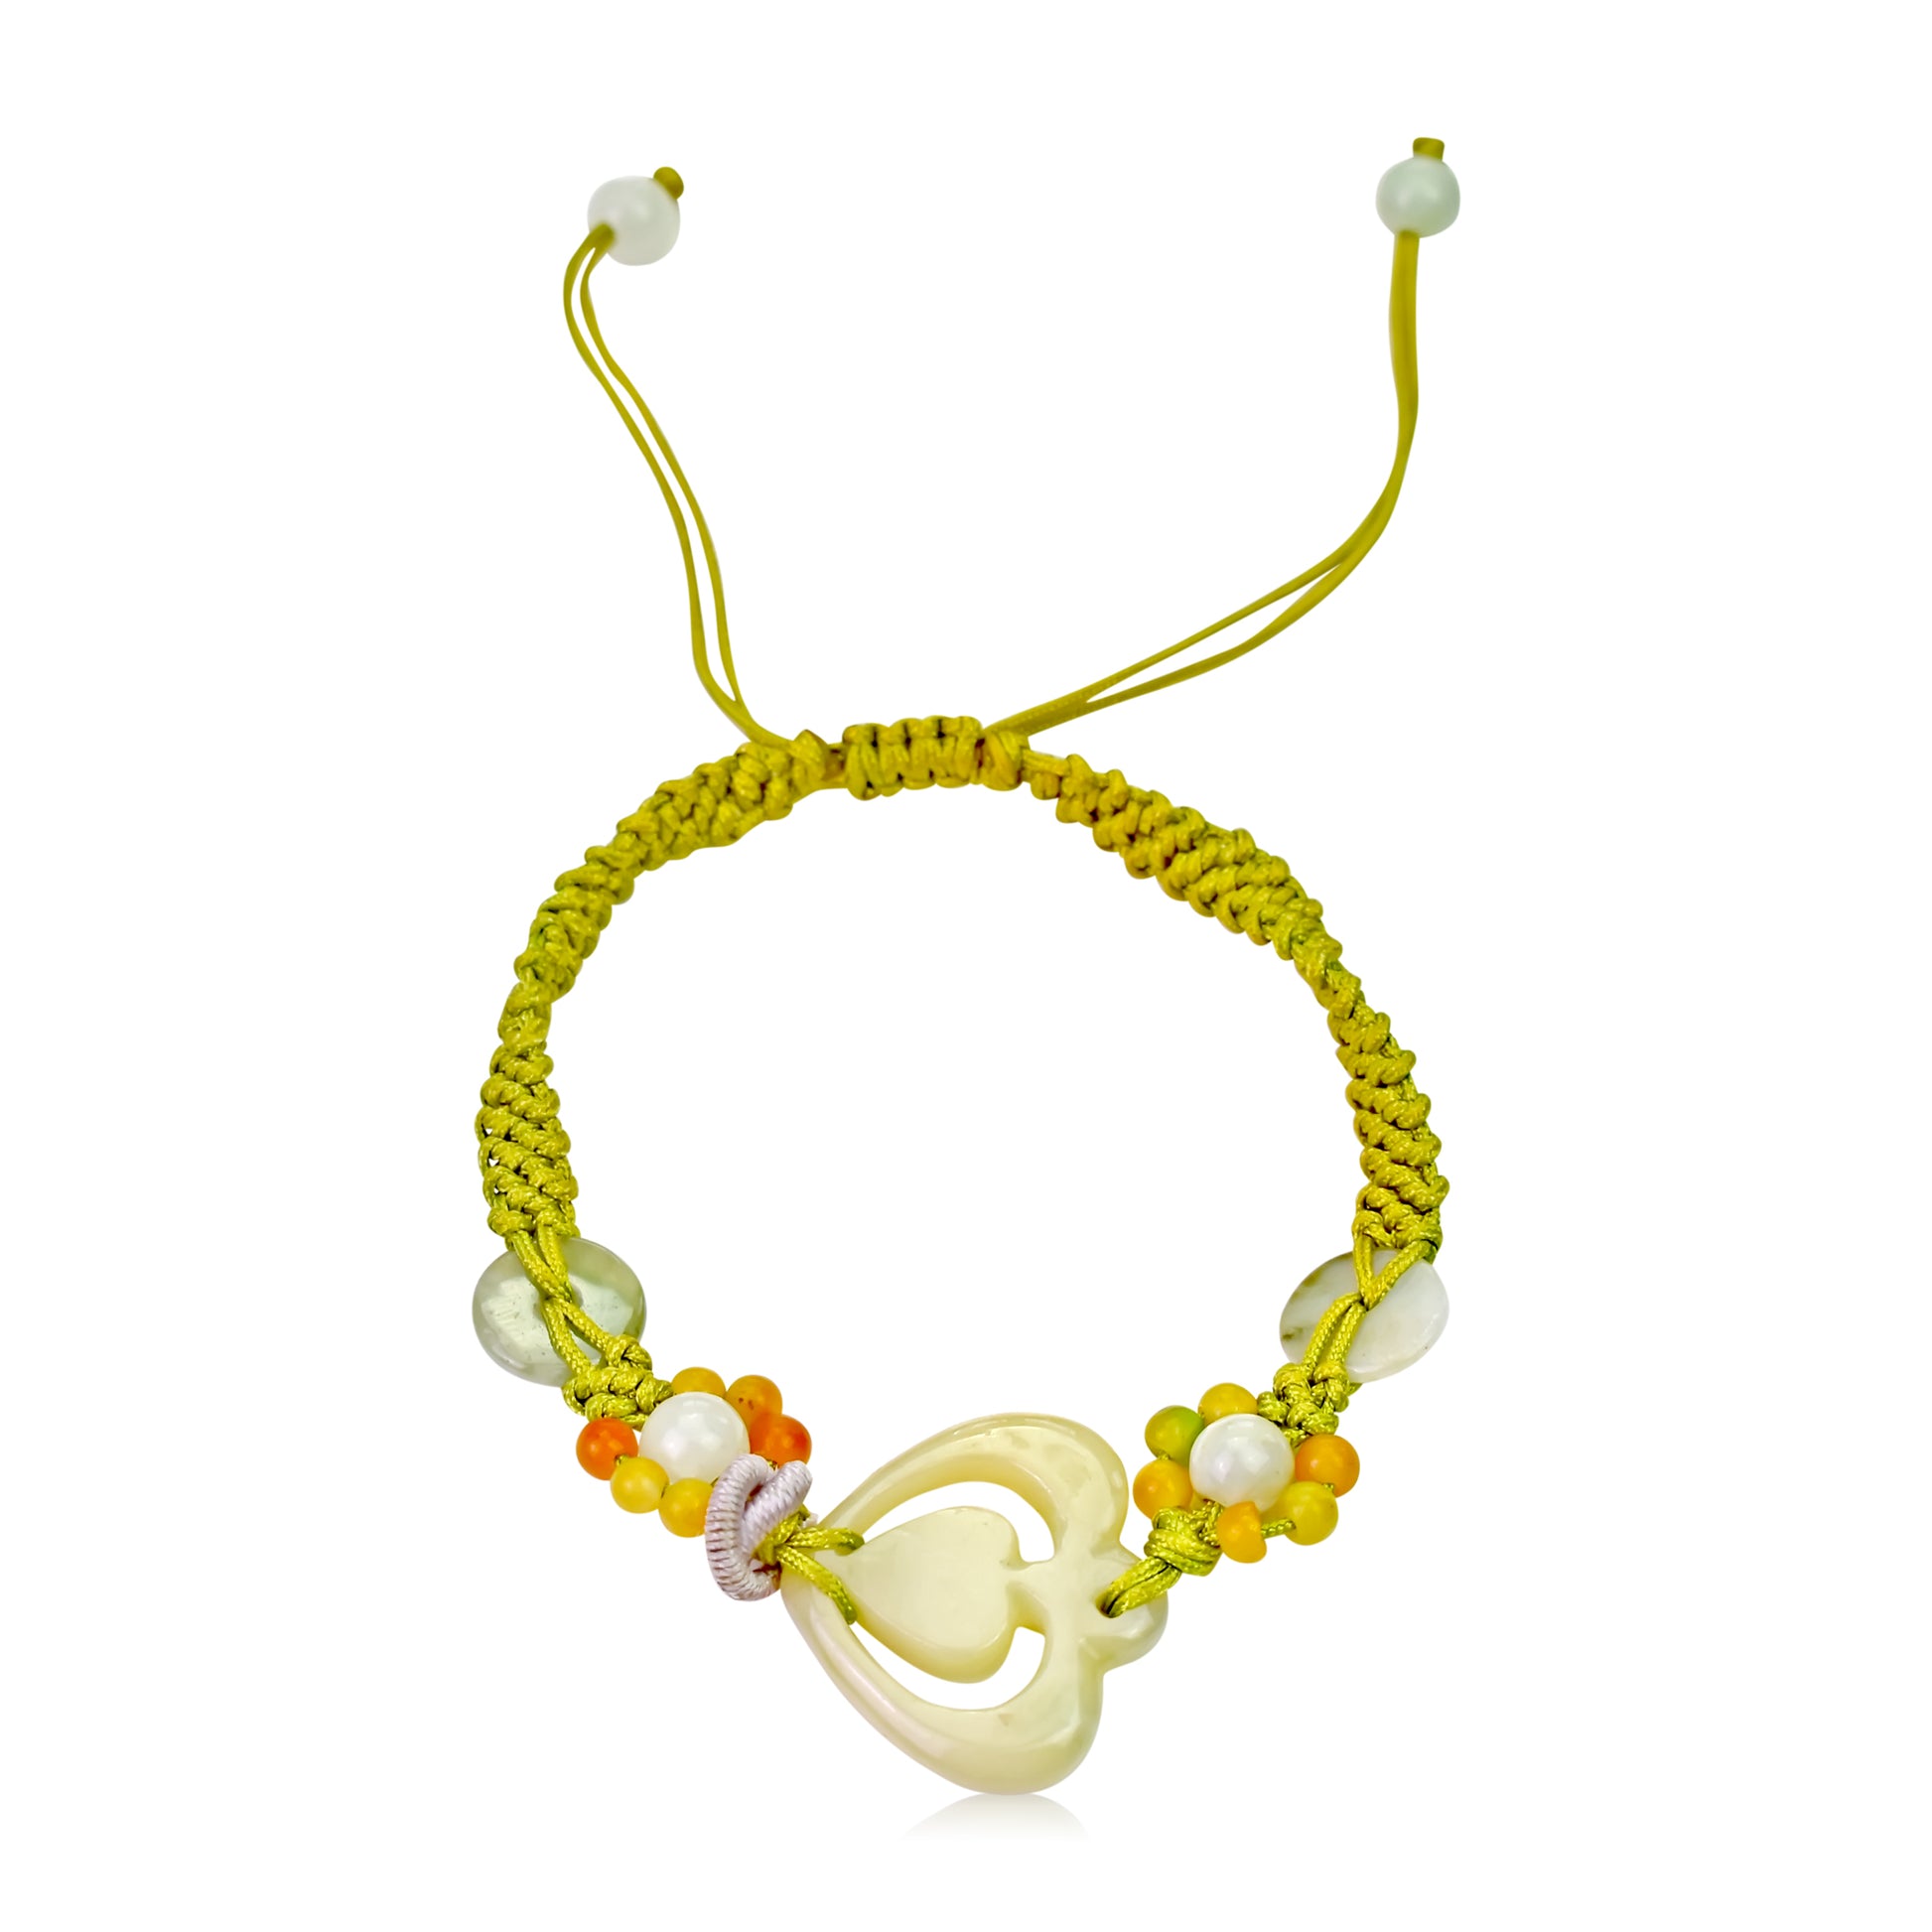 Love is in the Air with this Handmade Heart Jade Bracelet made with Lime Cord